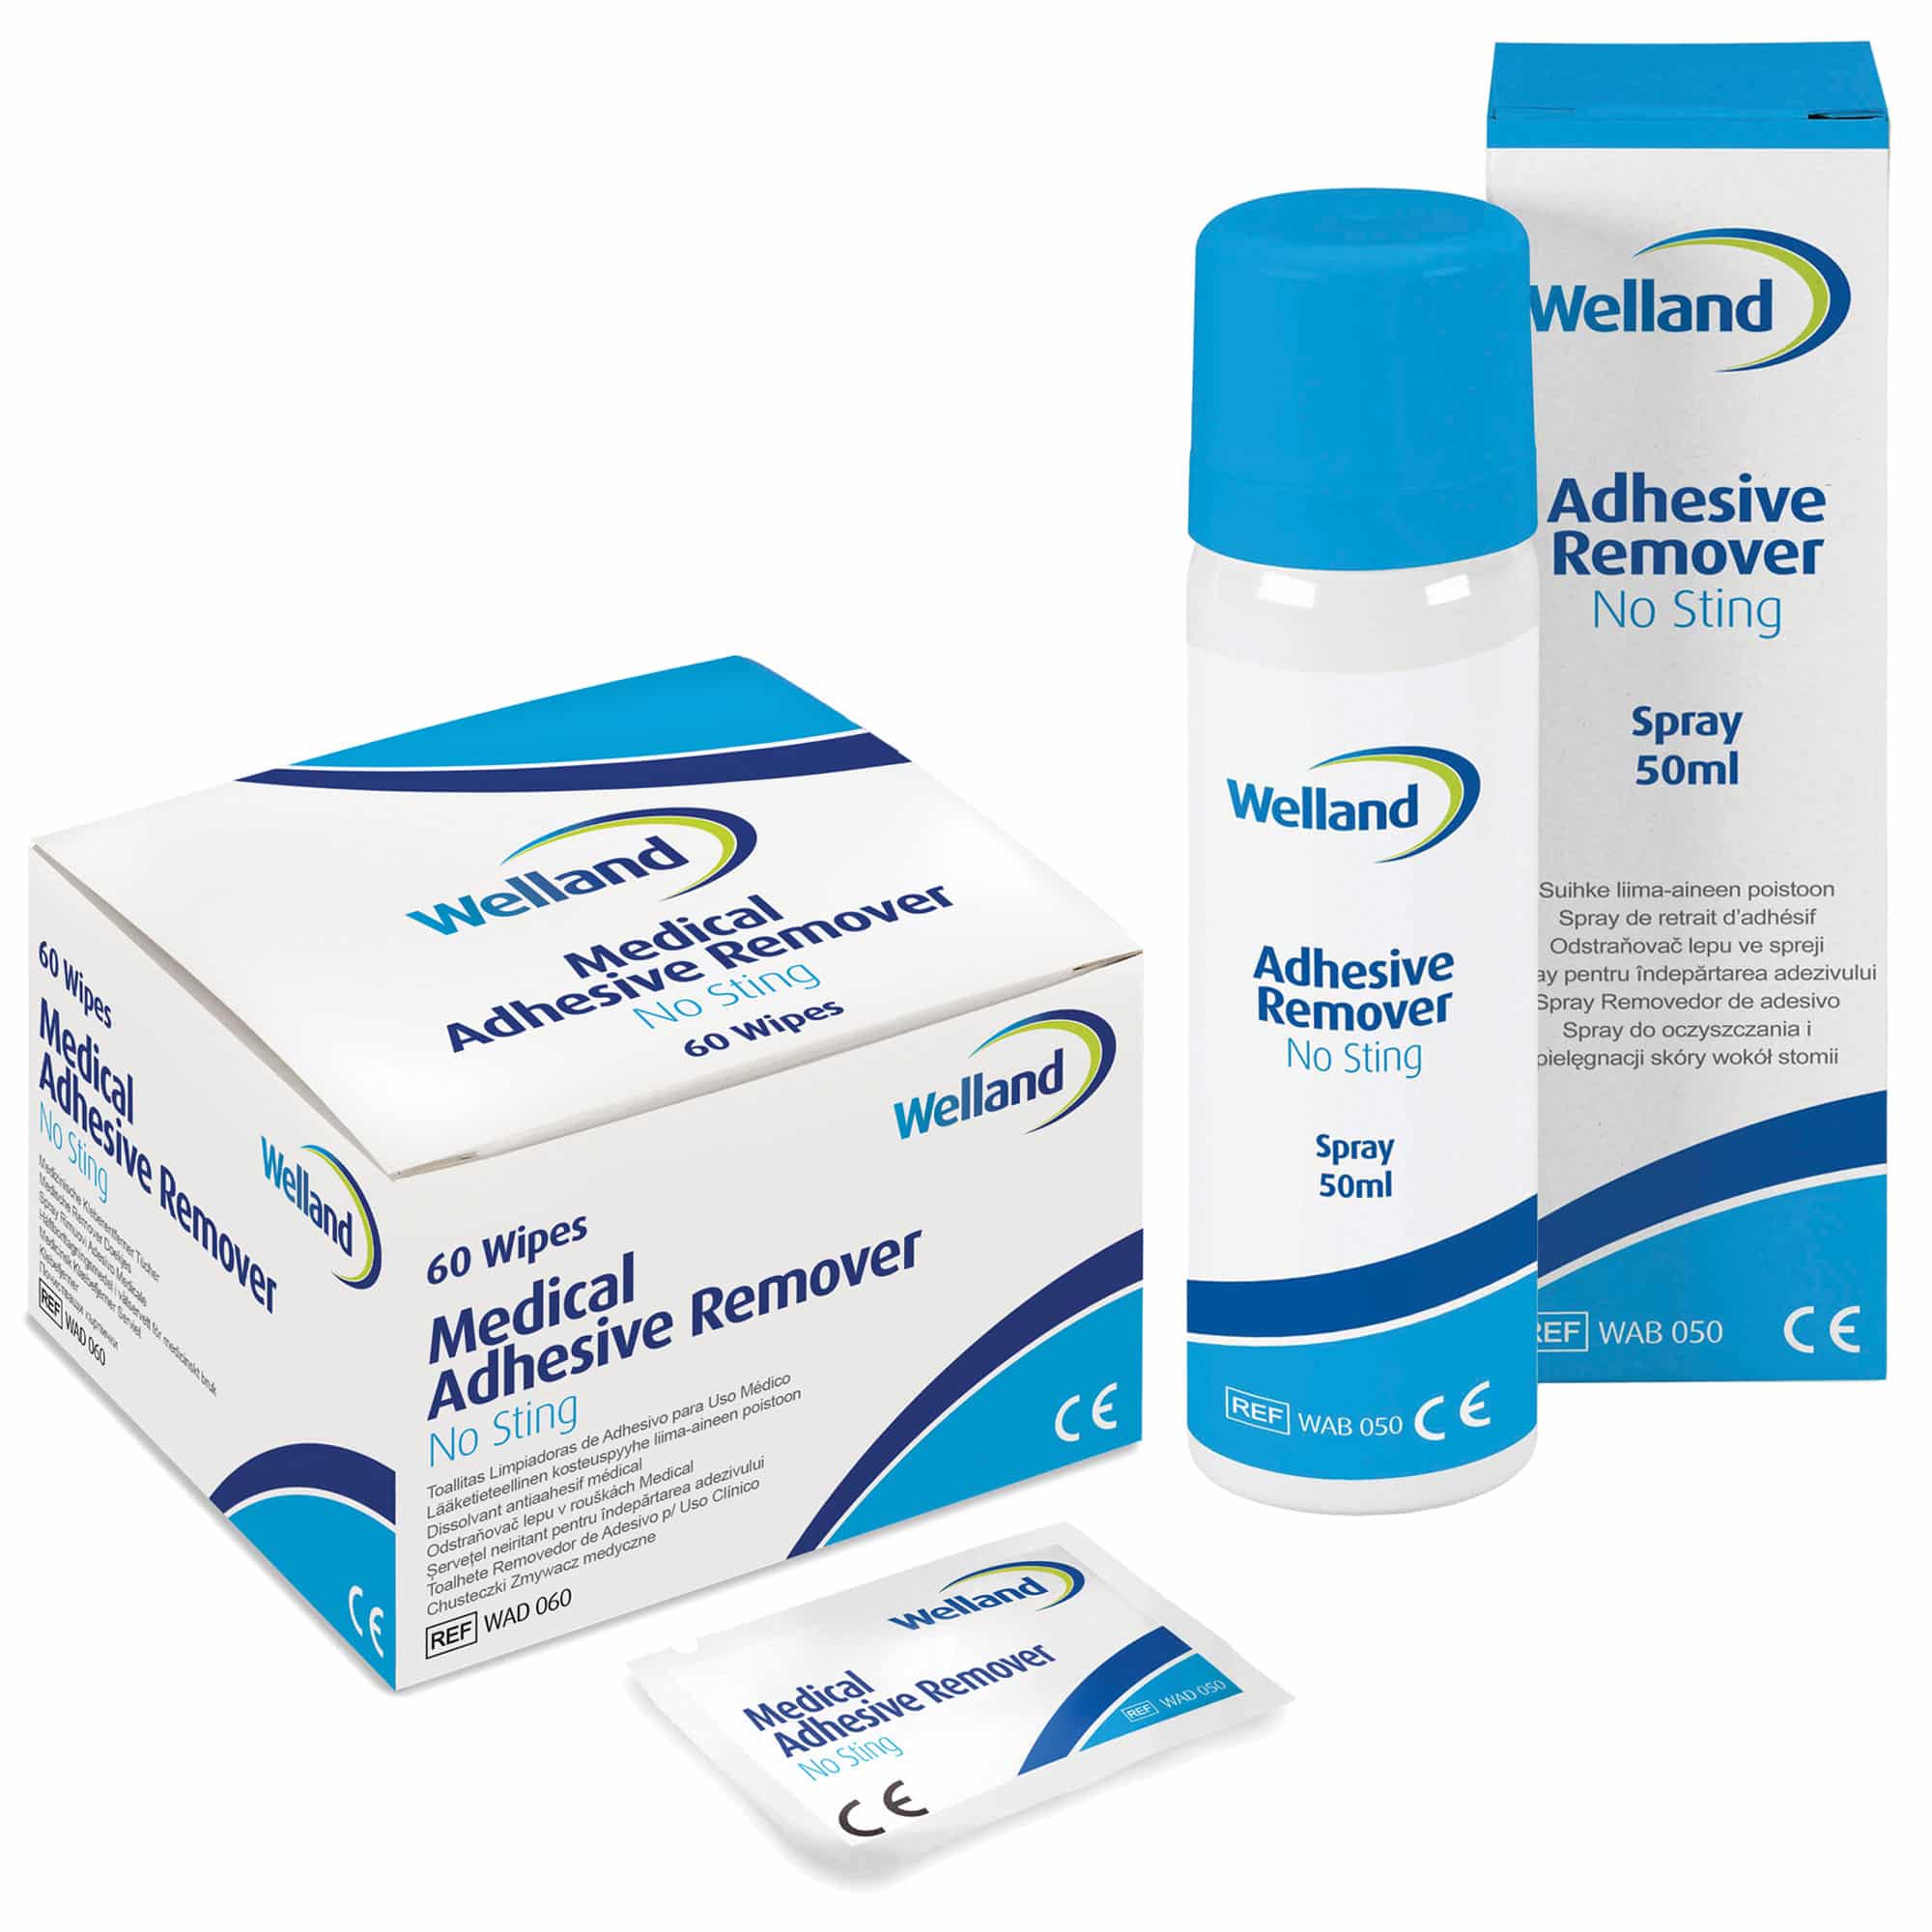 Adhesive Remover Wipes - North Coast Medical